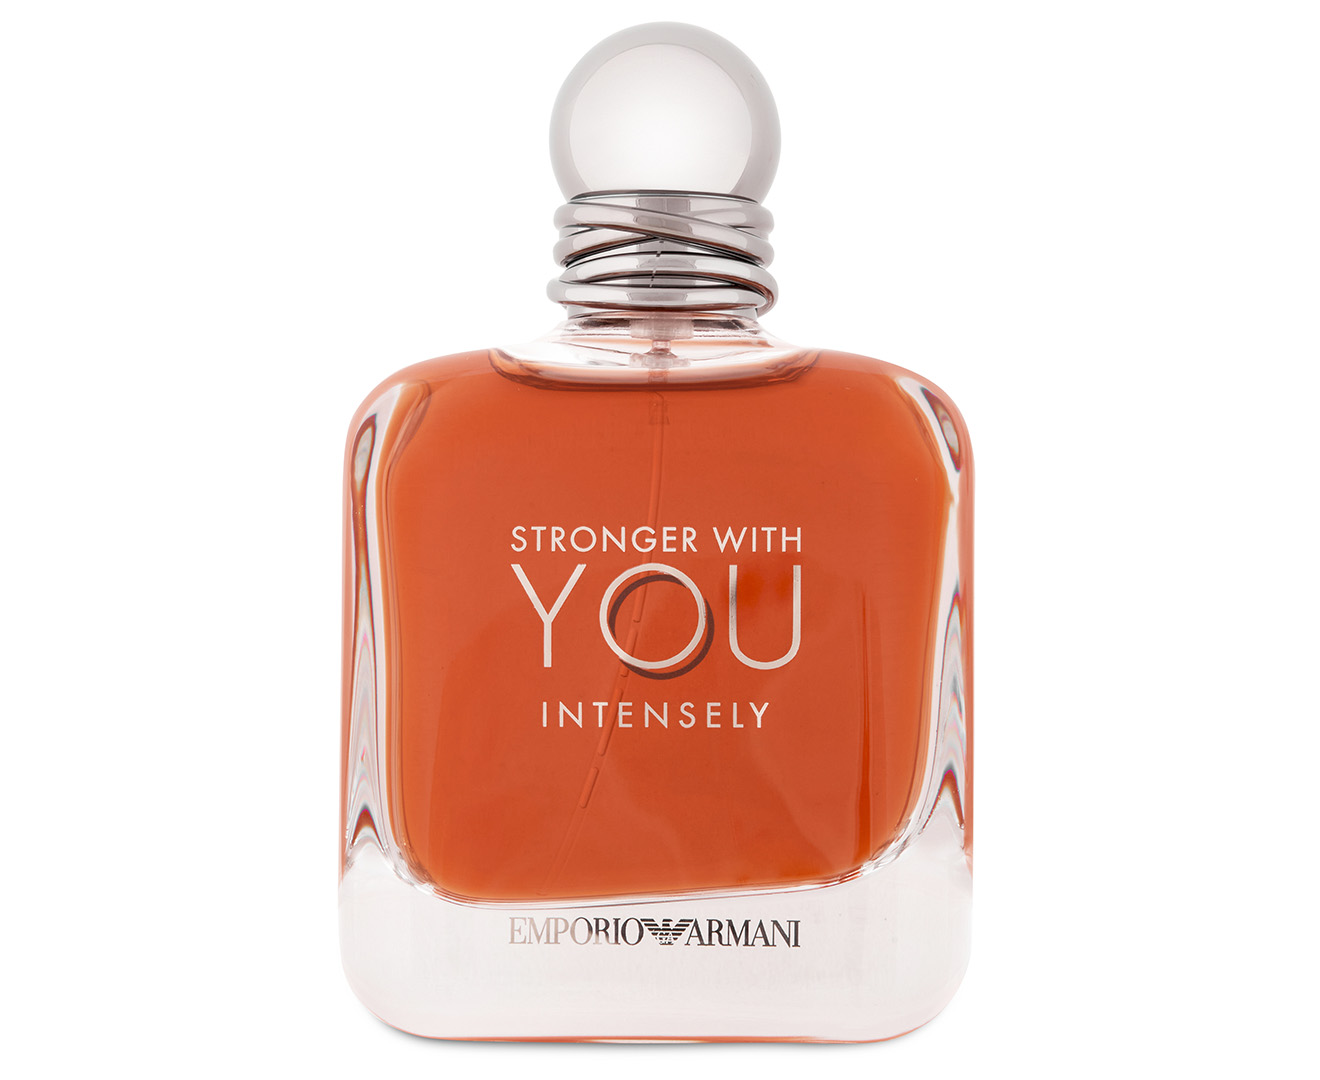 Emporio Armani Stronger With You Intensely For Men EDP Perfume 100mL |  